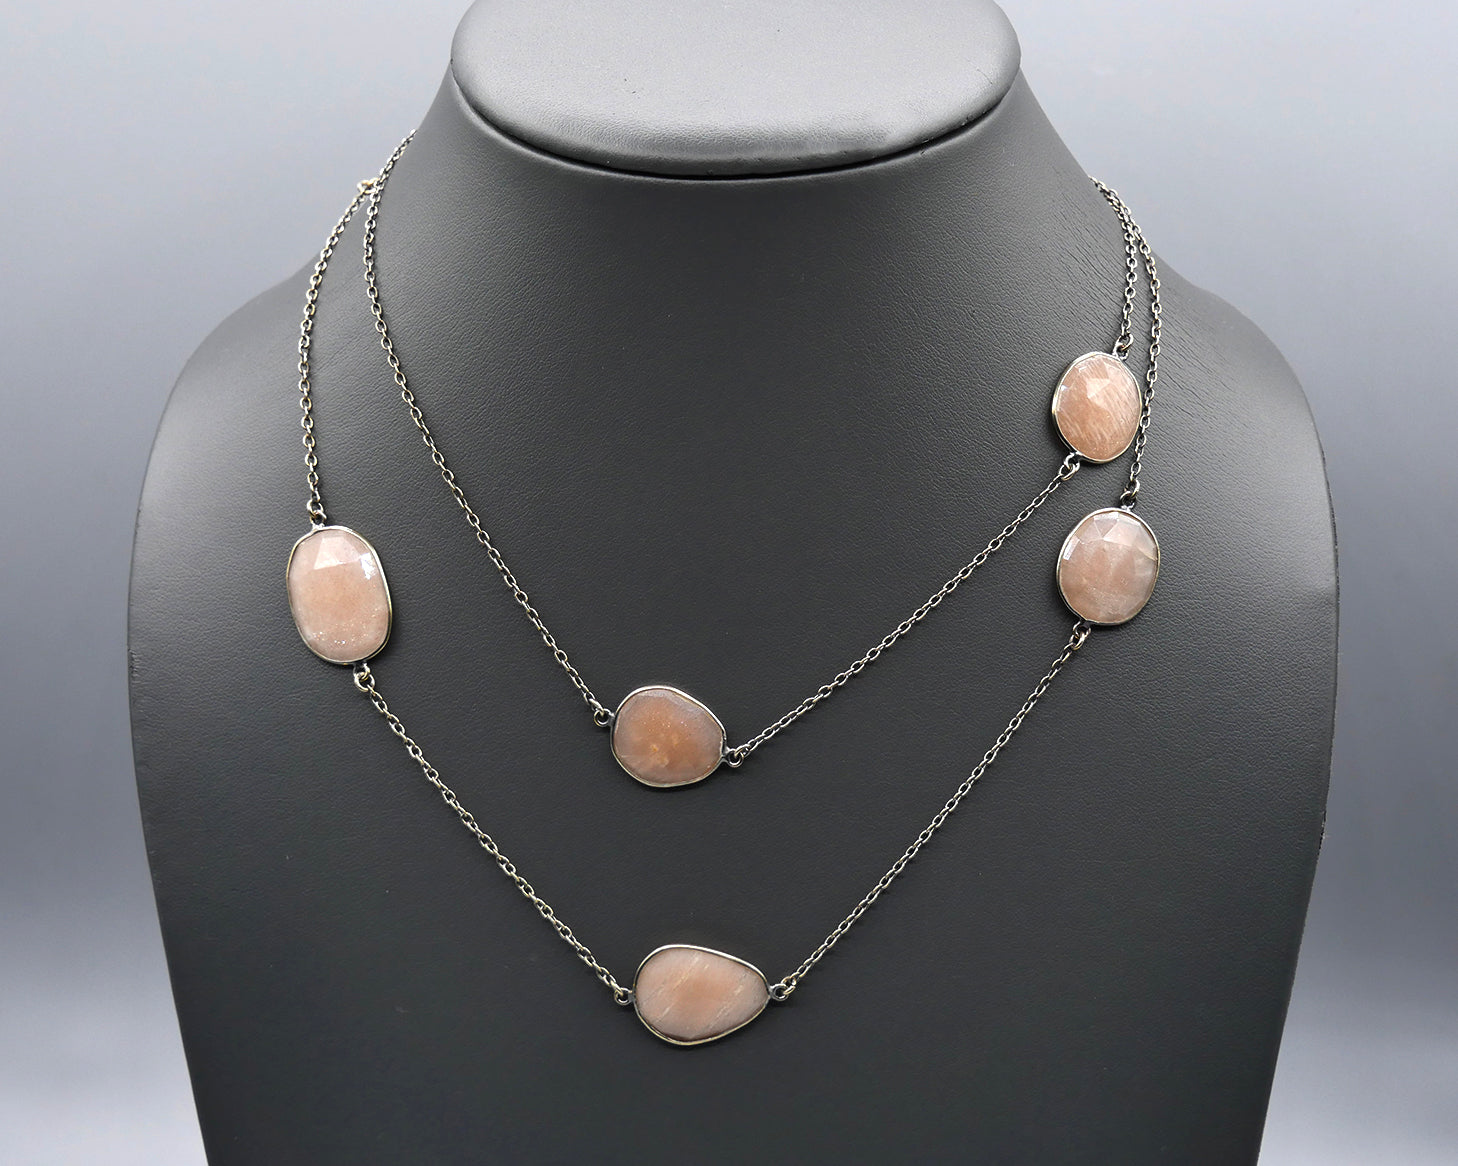 Chain Gang Collection- Large, Peach Chalcedony Stone Necklace